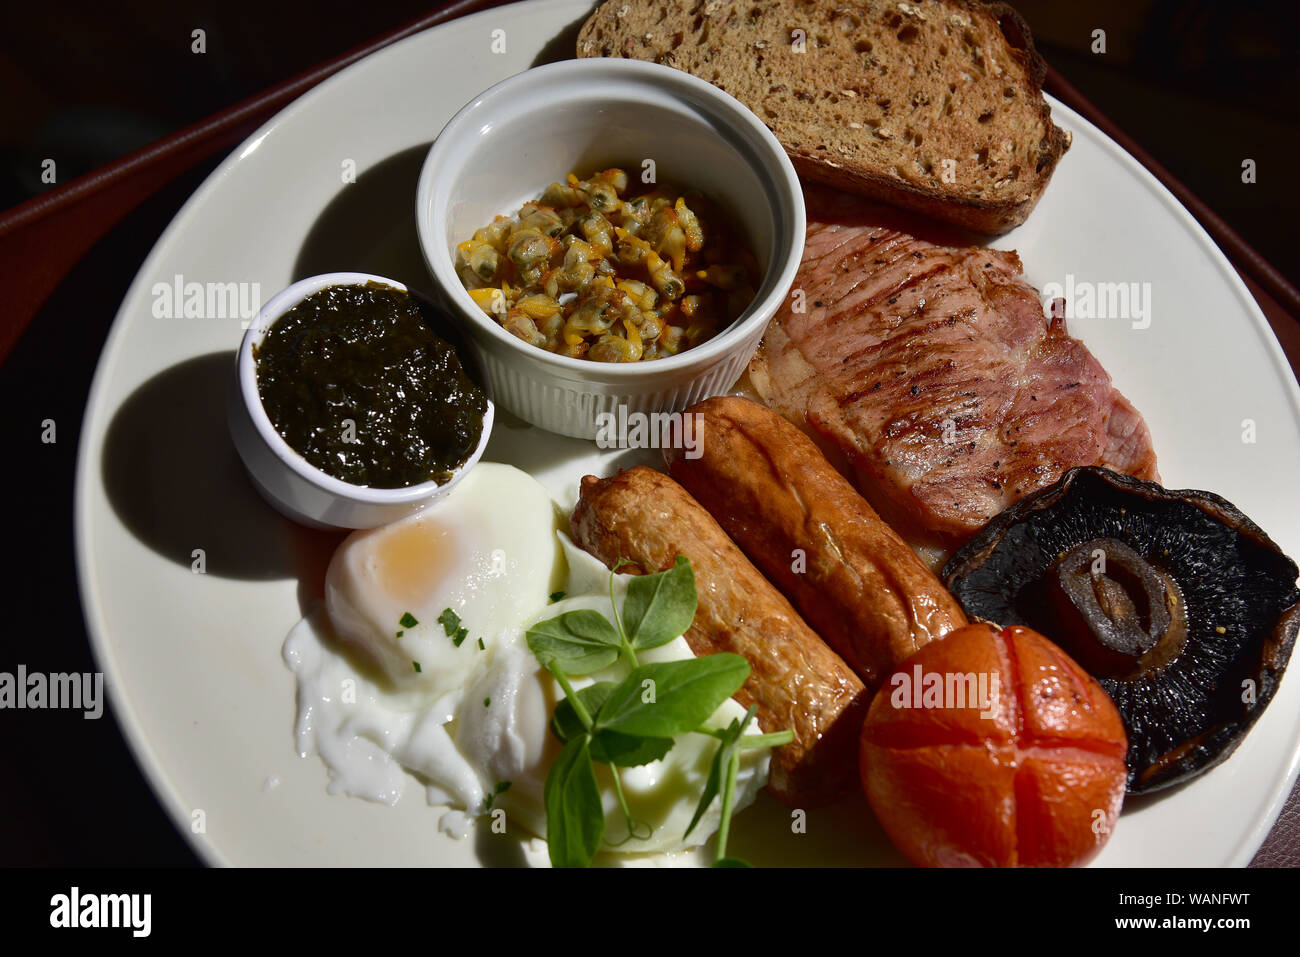 Welsh cooked breakfast, poached egg, laver bread, cockles, toast, sausages, bacon, tomato, mushroom, watercress Stock Photo